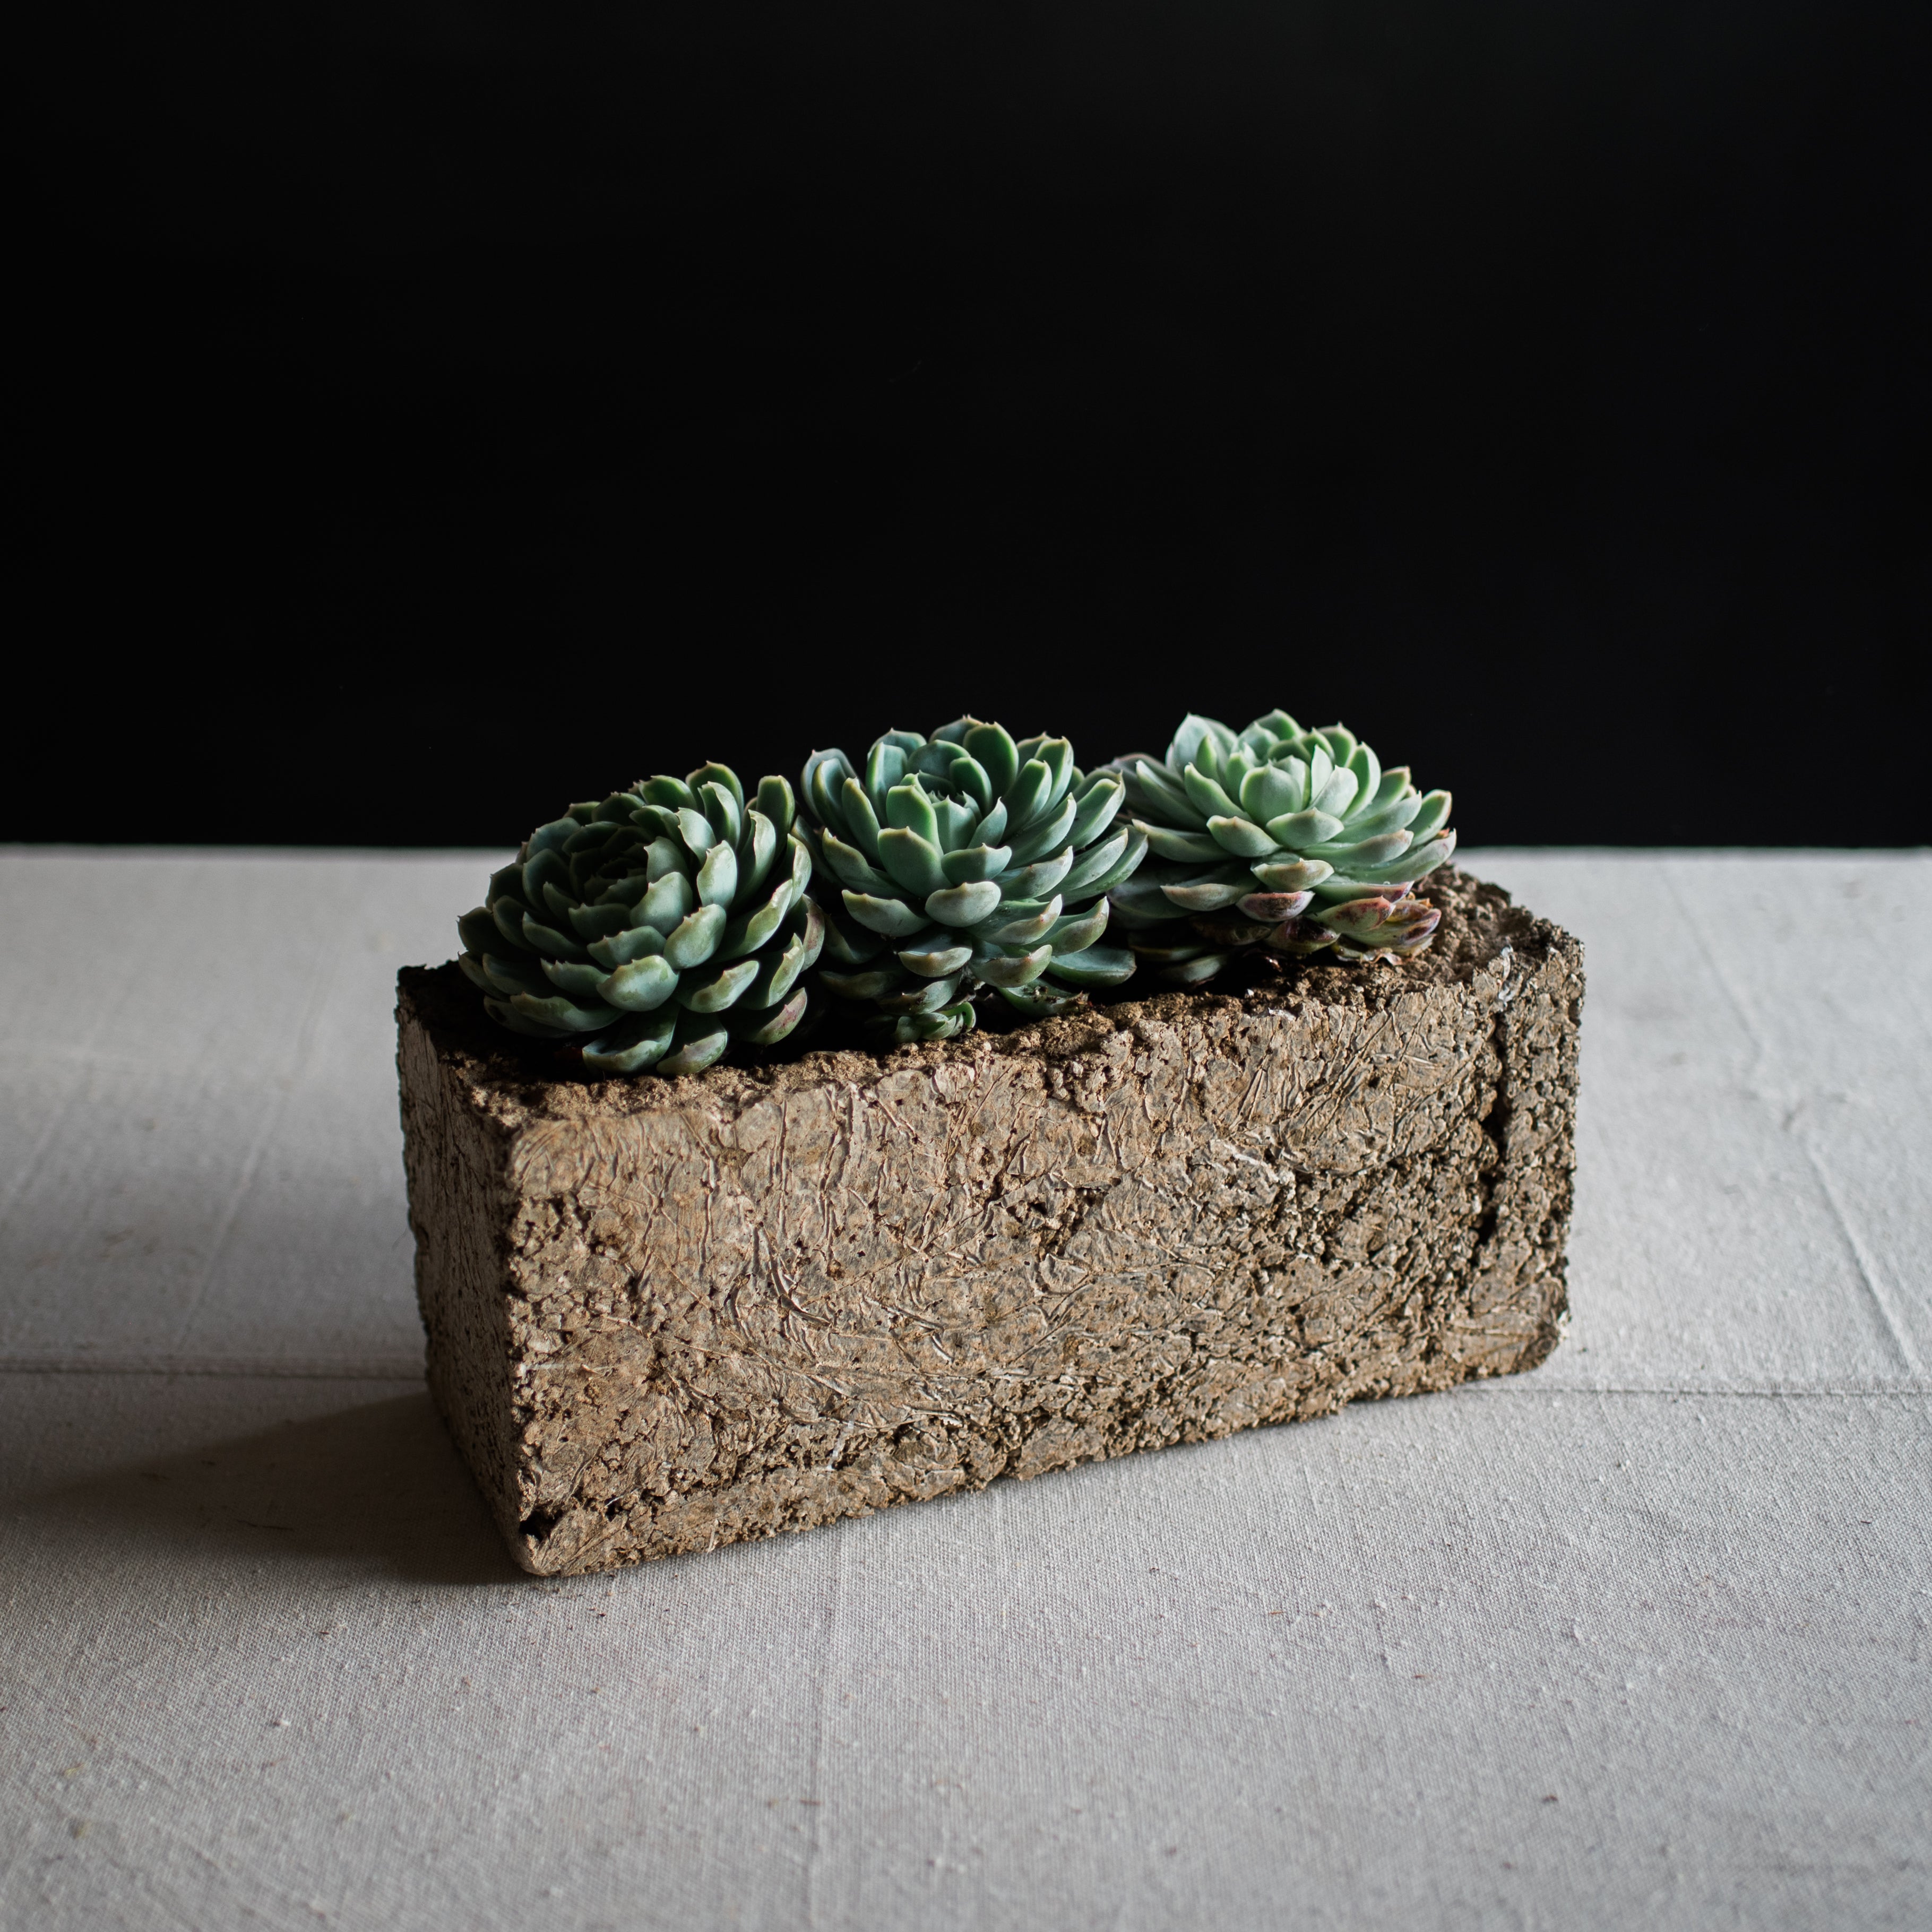 Modern Mini Farm Table Garden Planter - DIY Kit. Our Farm Table Planter Kit comes with all the succulents and soil you’ll need. This modern garden planter is handmade from our Pozzola pottery, it comes in a pale bone color, has the look and texture of washed stone, but is ultra lightweight, durable and crafted with love in our studio in San Francisco. Our Pozzola pottery is made of plant based and earth-friendly ingredients, an ideal environment for plants to thrive.